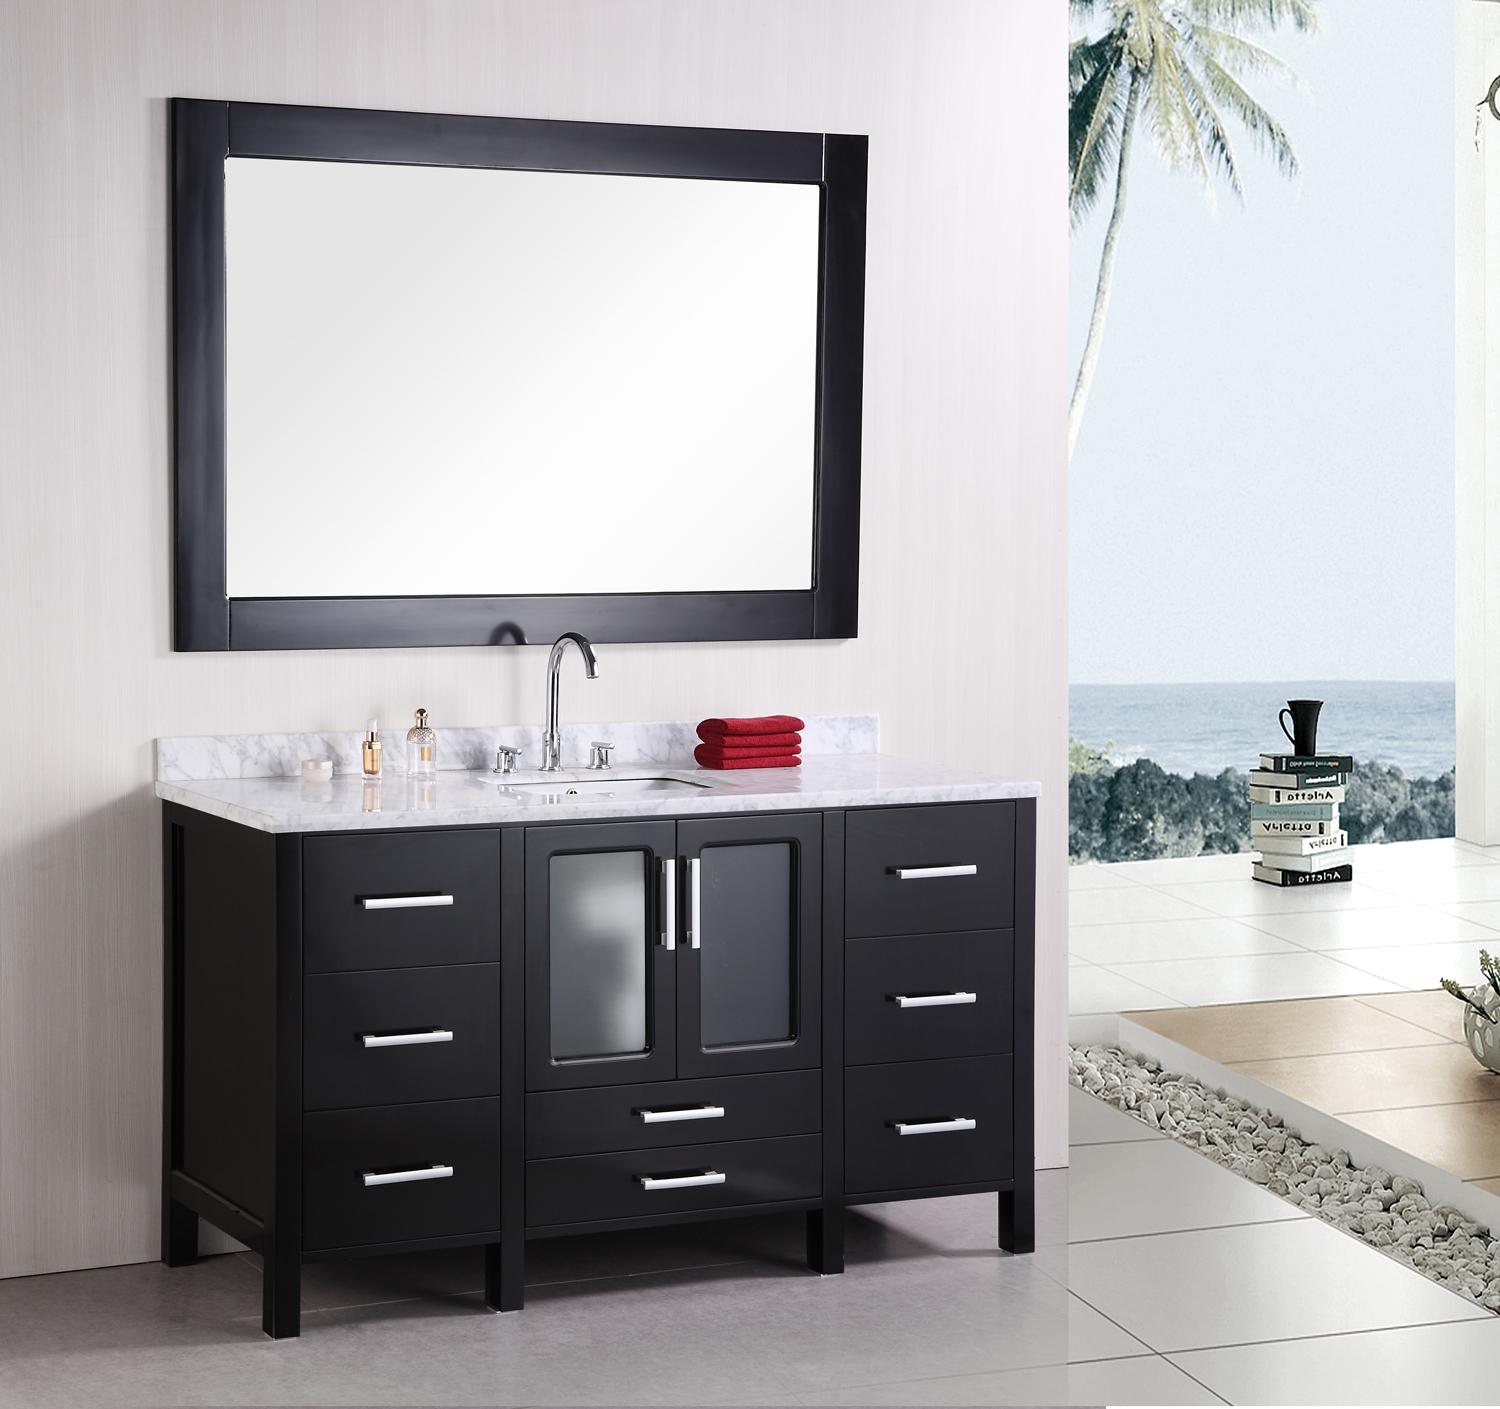 Design With White Bathroom Design With Marble Floor White Painted Walls Built In Washbasins Black Cabinet And Big Vanity Mirror Bathroom Stunning Bathroom Vanity Mirrors For Elegant Homes